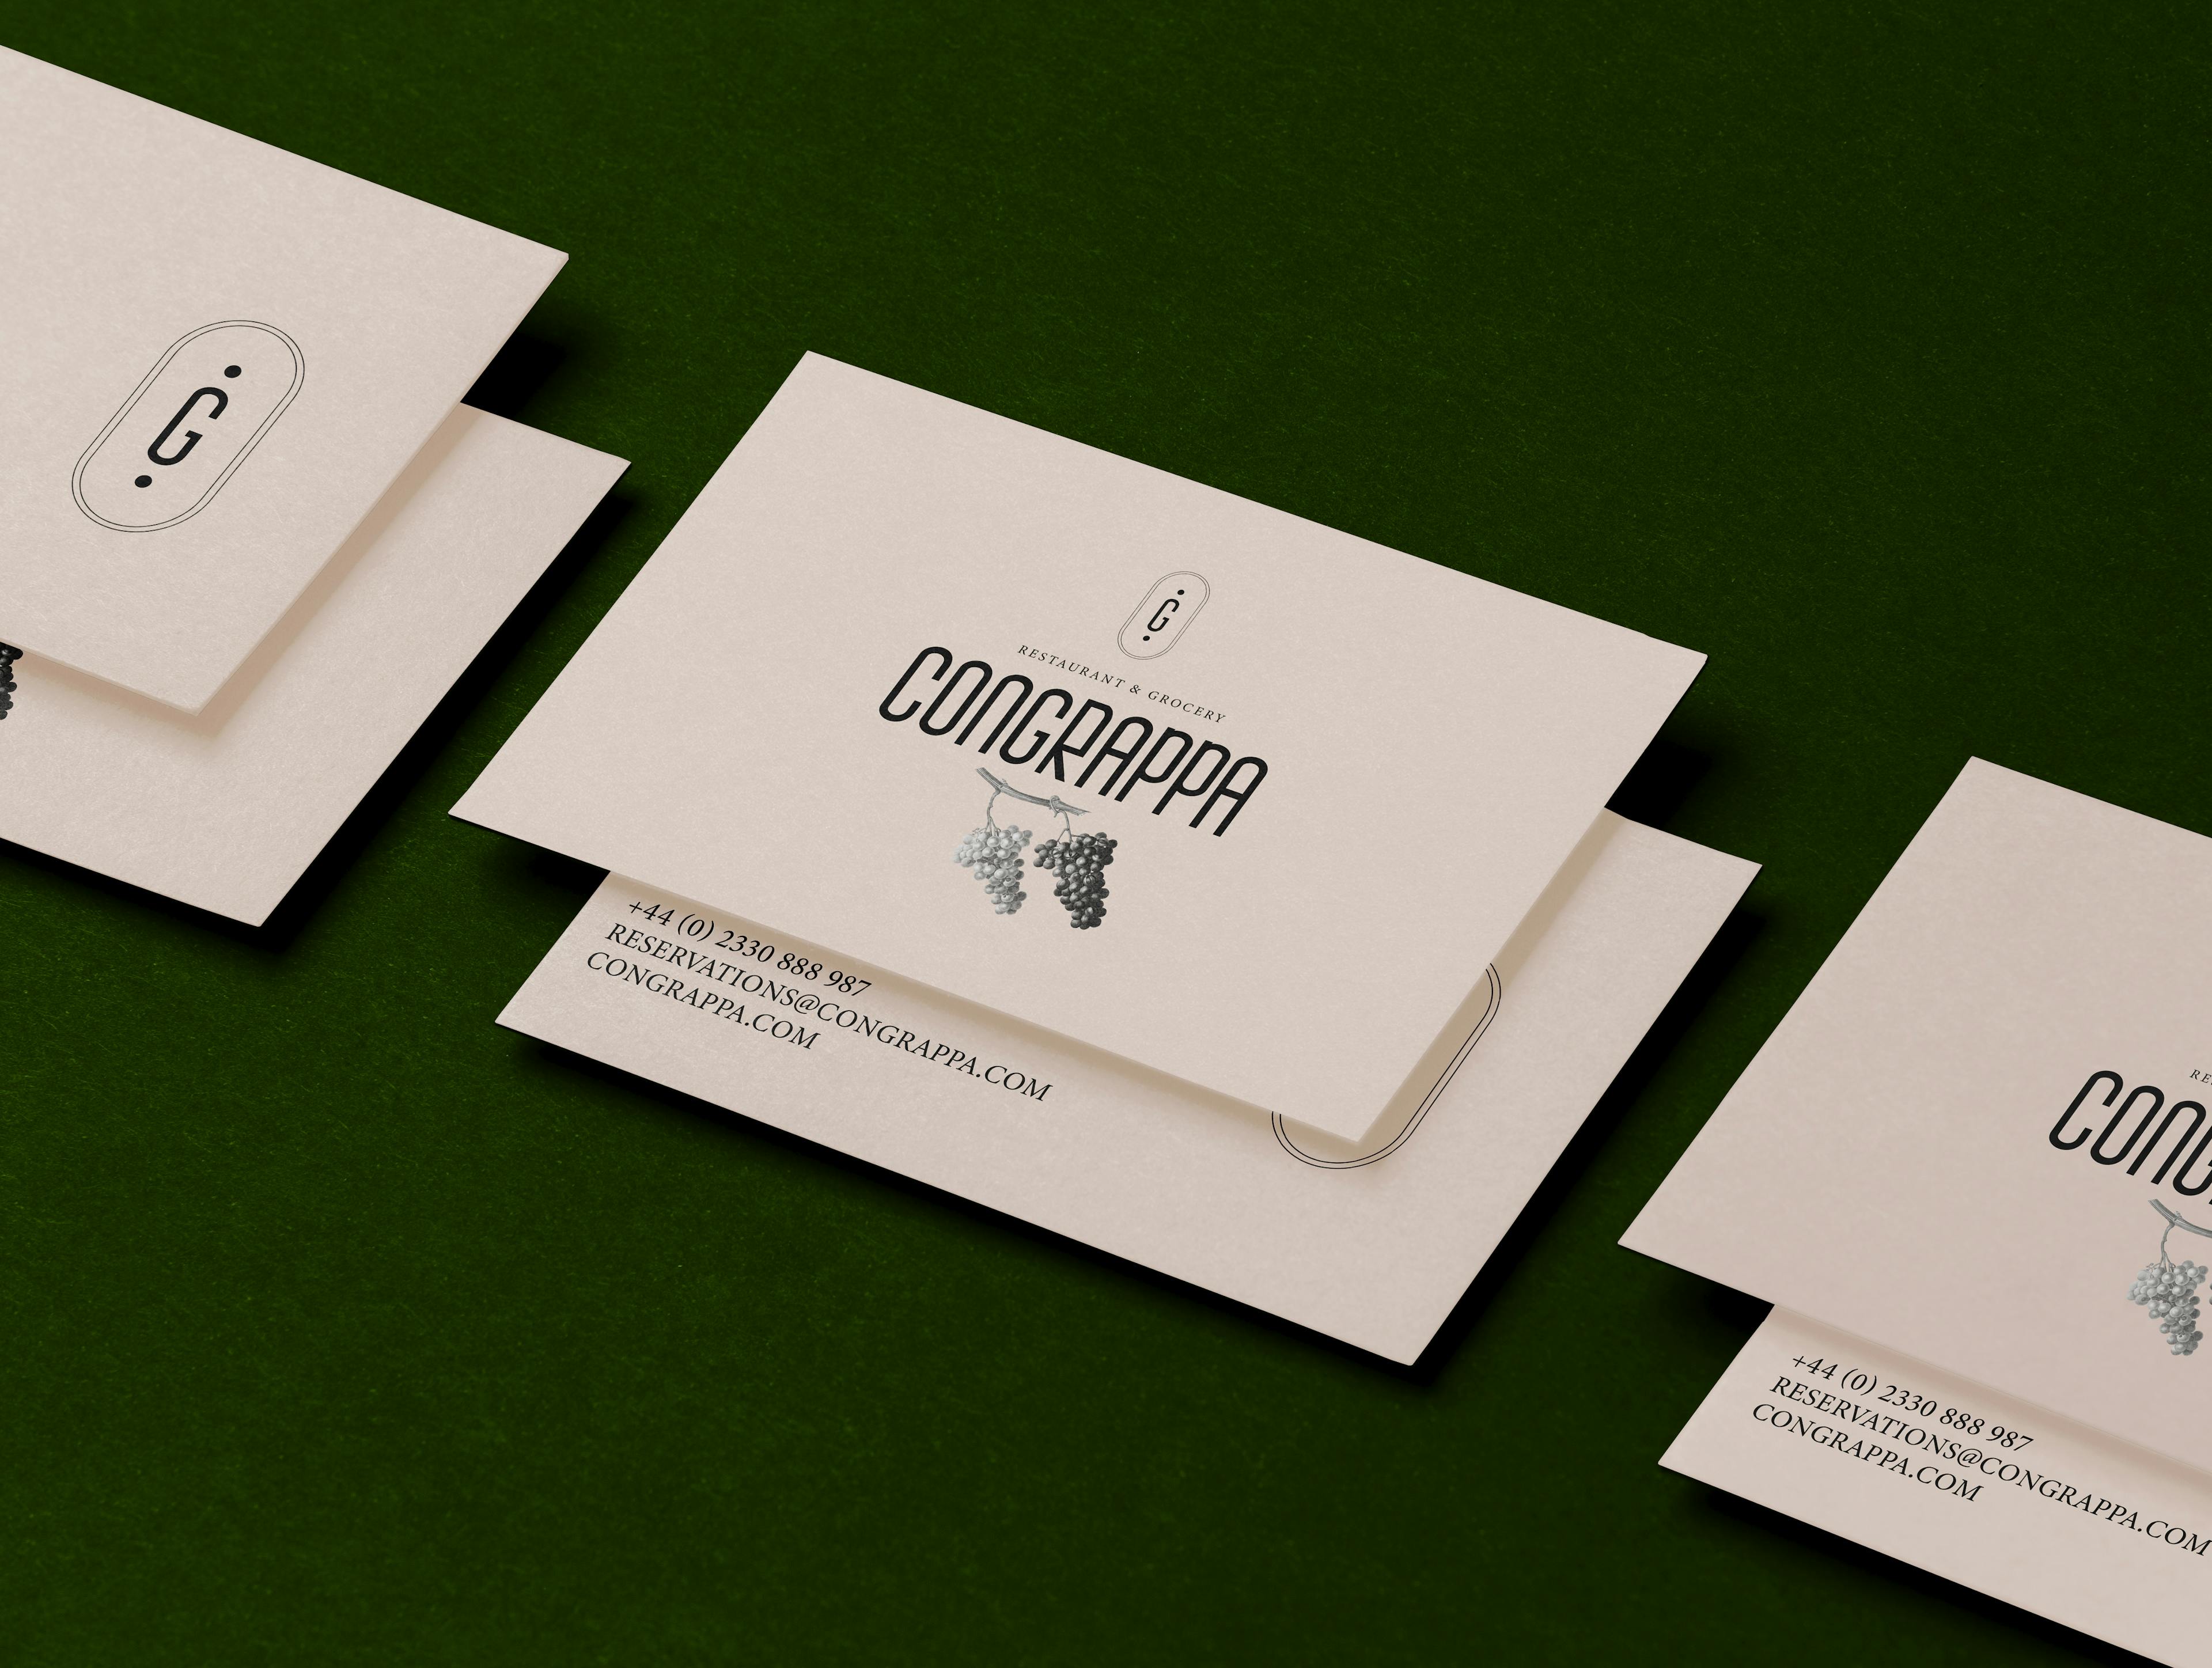 Business card for Congrappa